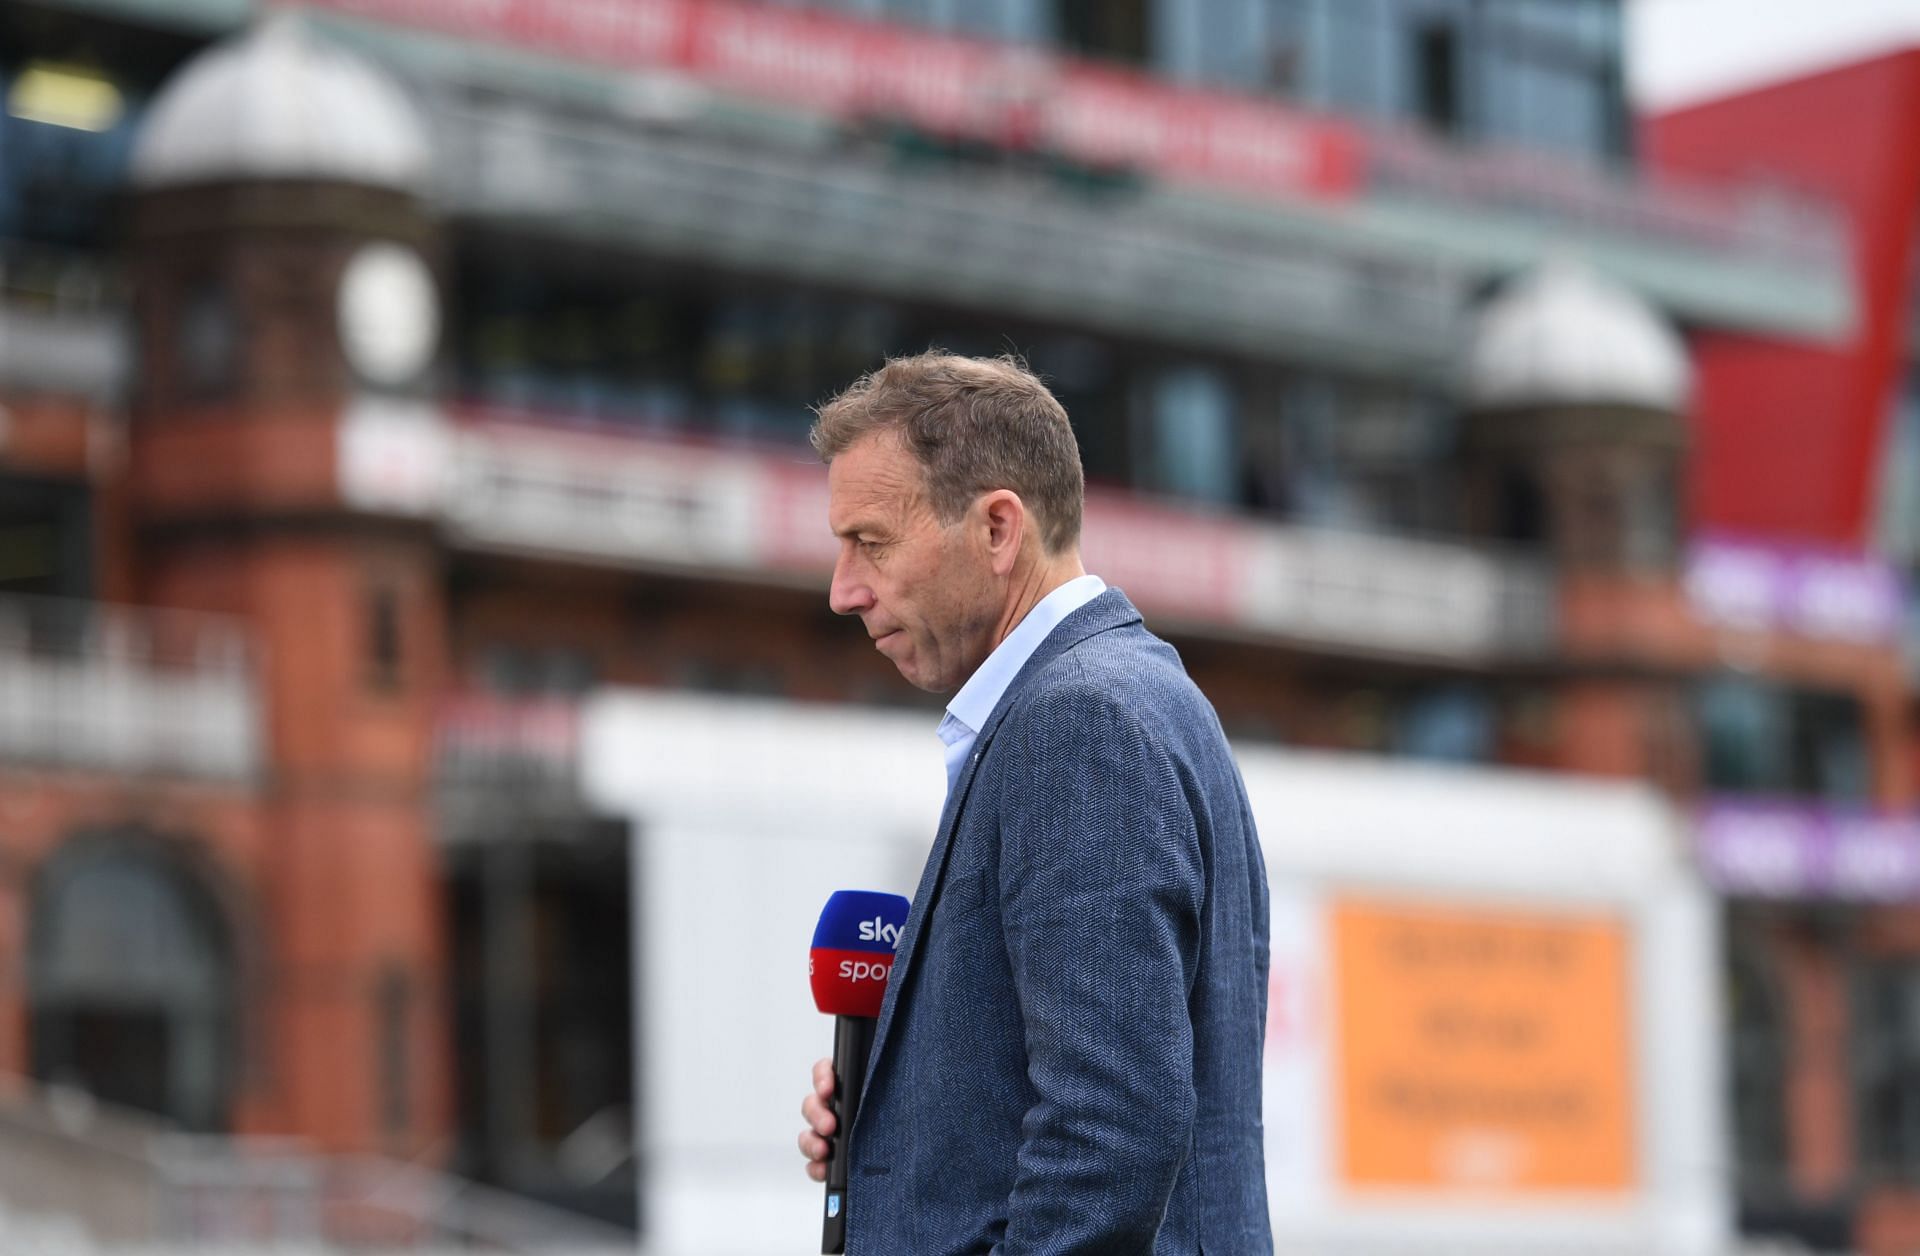 Michael Atherton gives his thoughts on Chris Silverwood's sacking 